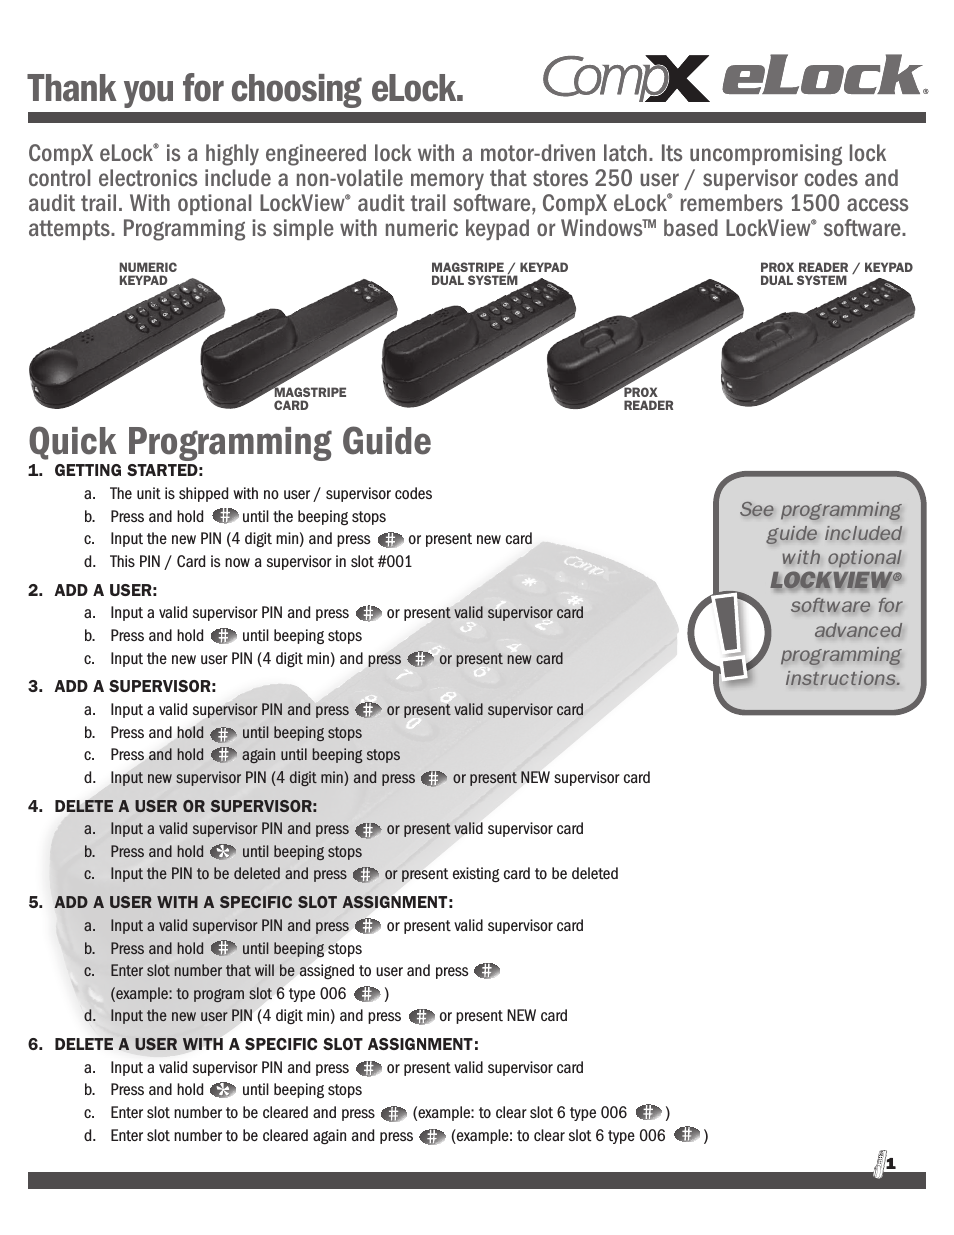 Prox Reader Quick Programming Guide